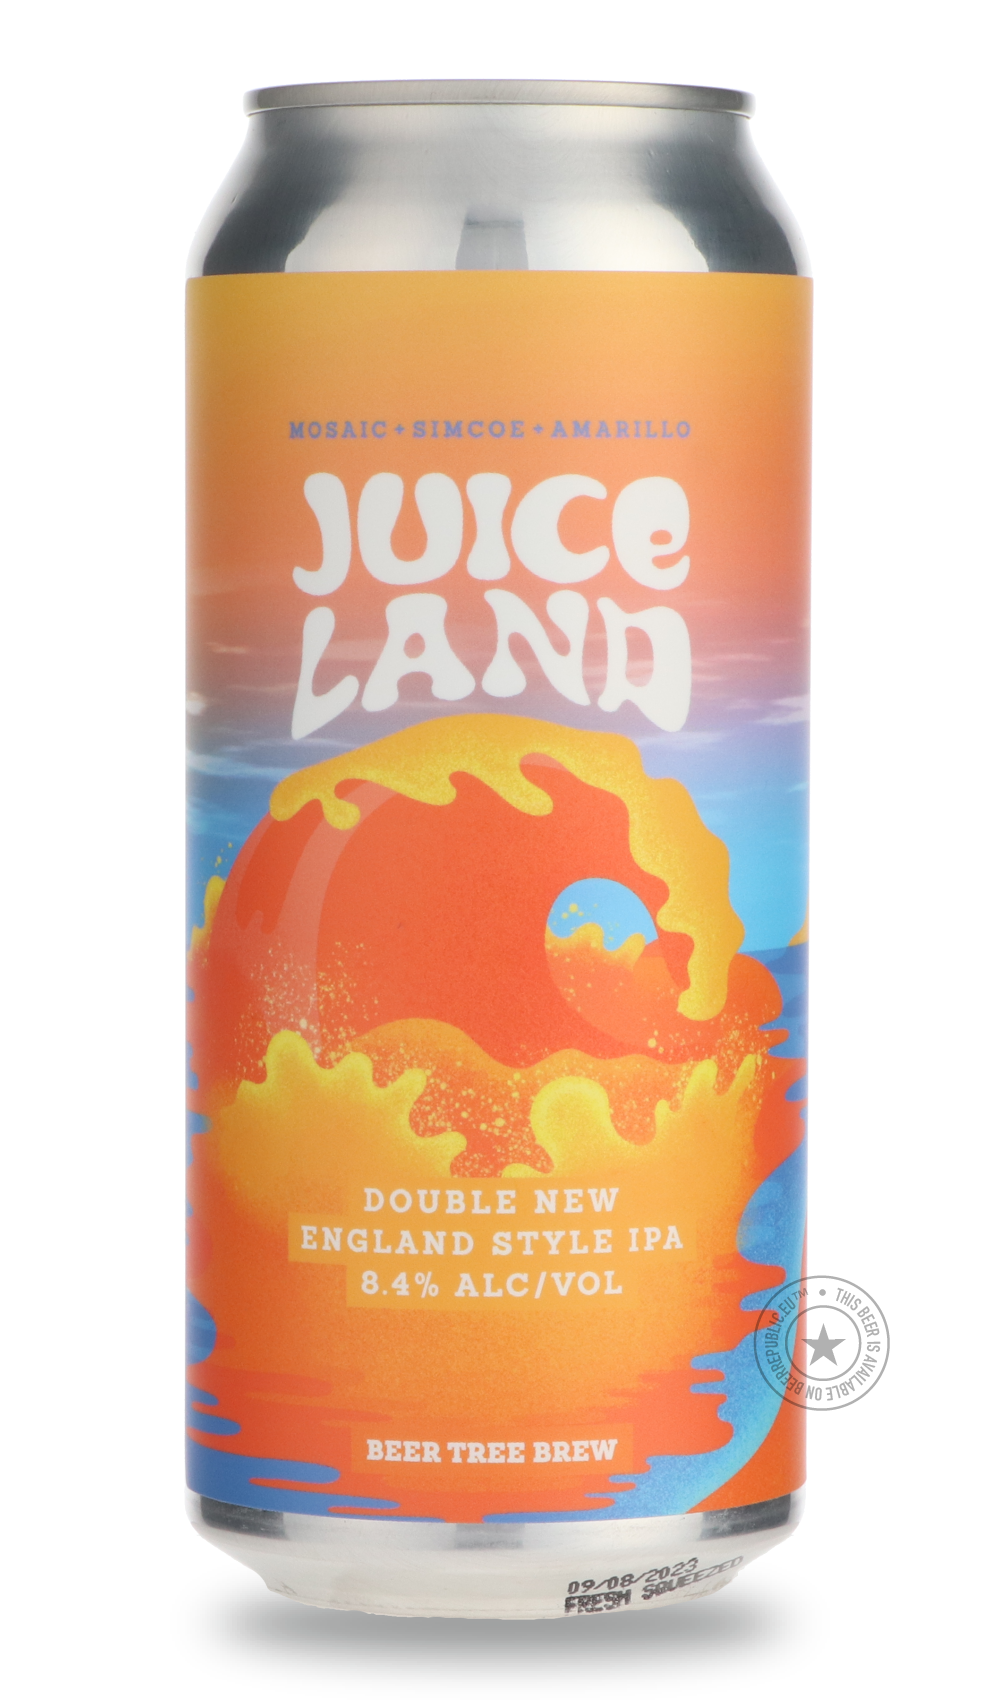 -Beer Tree- Juice Land - Mosaic, Simcoe, Amarillo-IPA- Only @ Beer Republic - The best online beer store for American & Canadian craft beer - Buy beer online from the USA and Canada - Bier online kopen - Amerikaans bier kopen - Craft beer store - Craft beer kopen - Amerikanisch bier kaufen - Bier online kaufen - Acheter biere online - IPA - Stout - Porter - New England IPA - Hazy IPA - Imperial Stout - Barrel Aged - Barrel Aged Imperial Stout - Brown - Dark beer - Blond - Blonde - Pilsner - Lager - Wheat - 